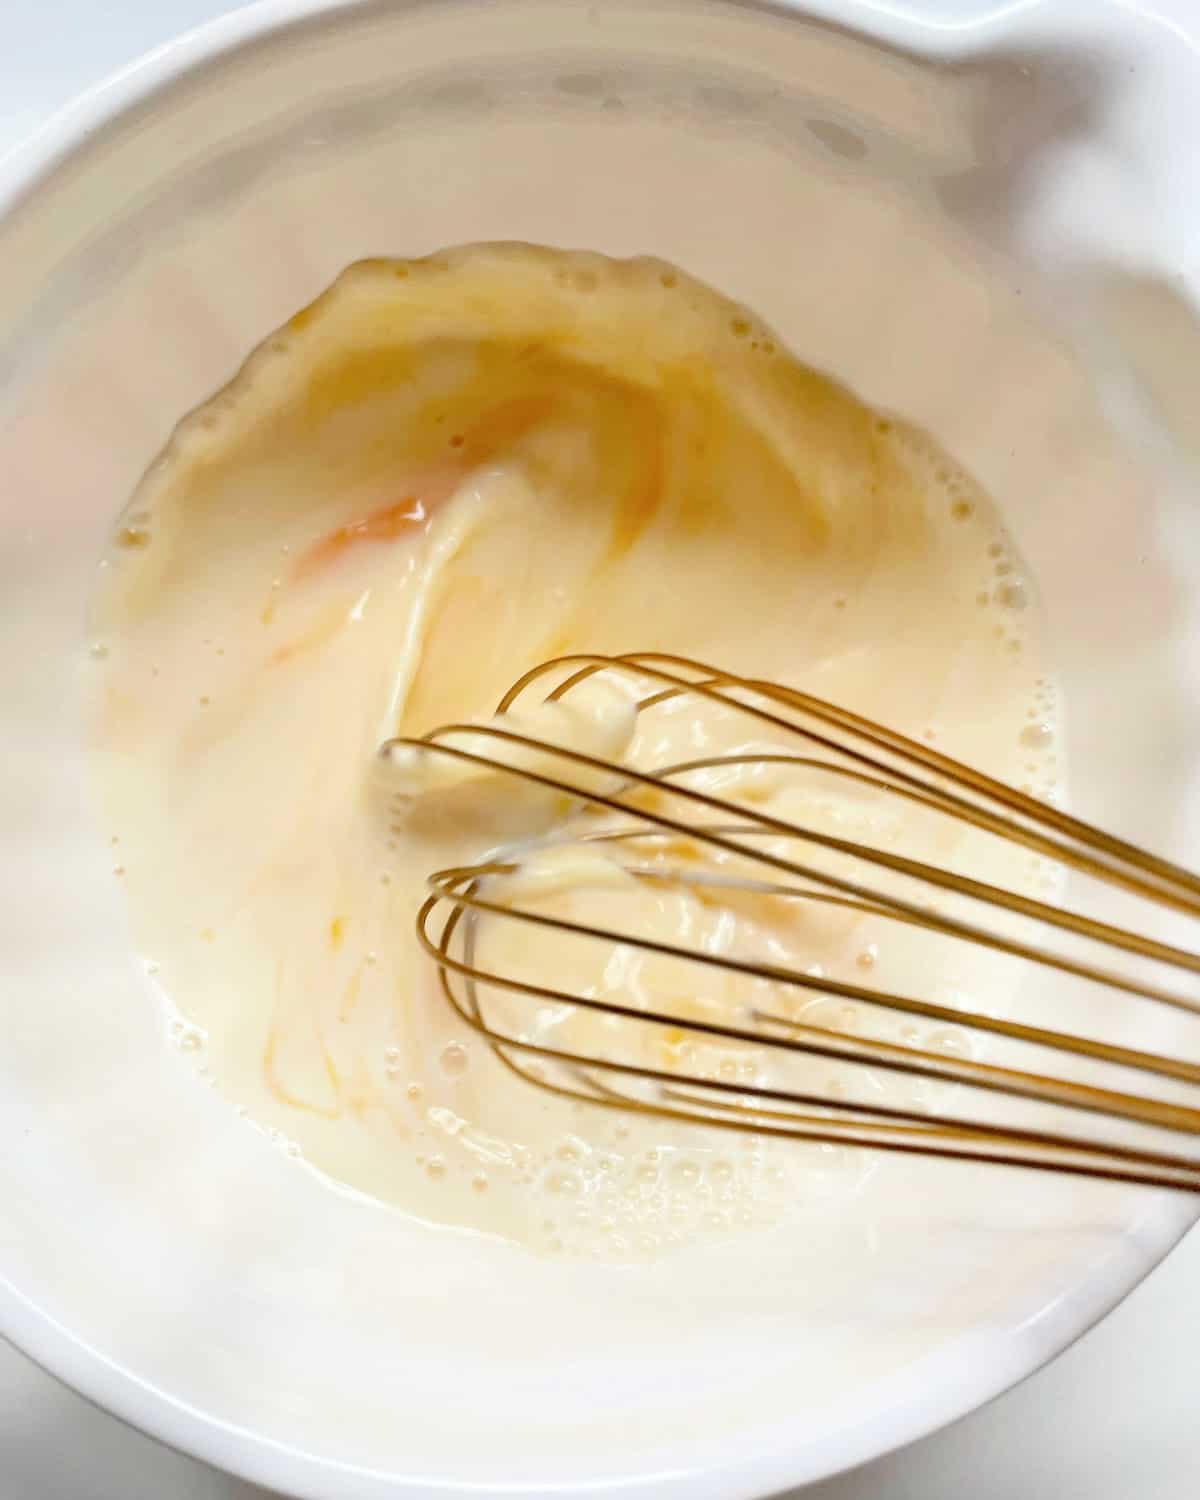 Mixing wet ingredients for muffins with a gold whisk in a white bowl.